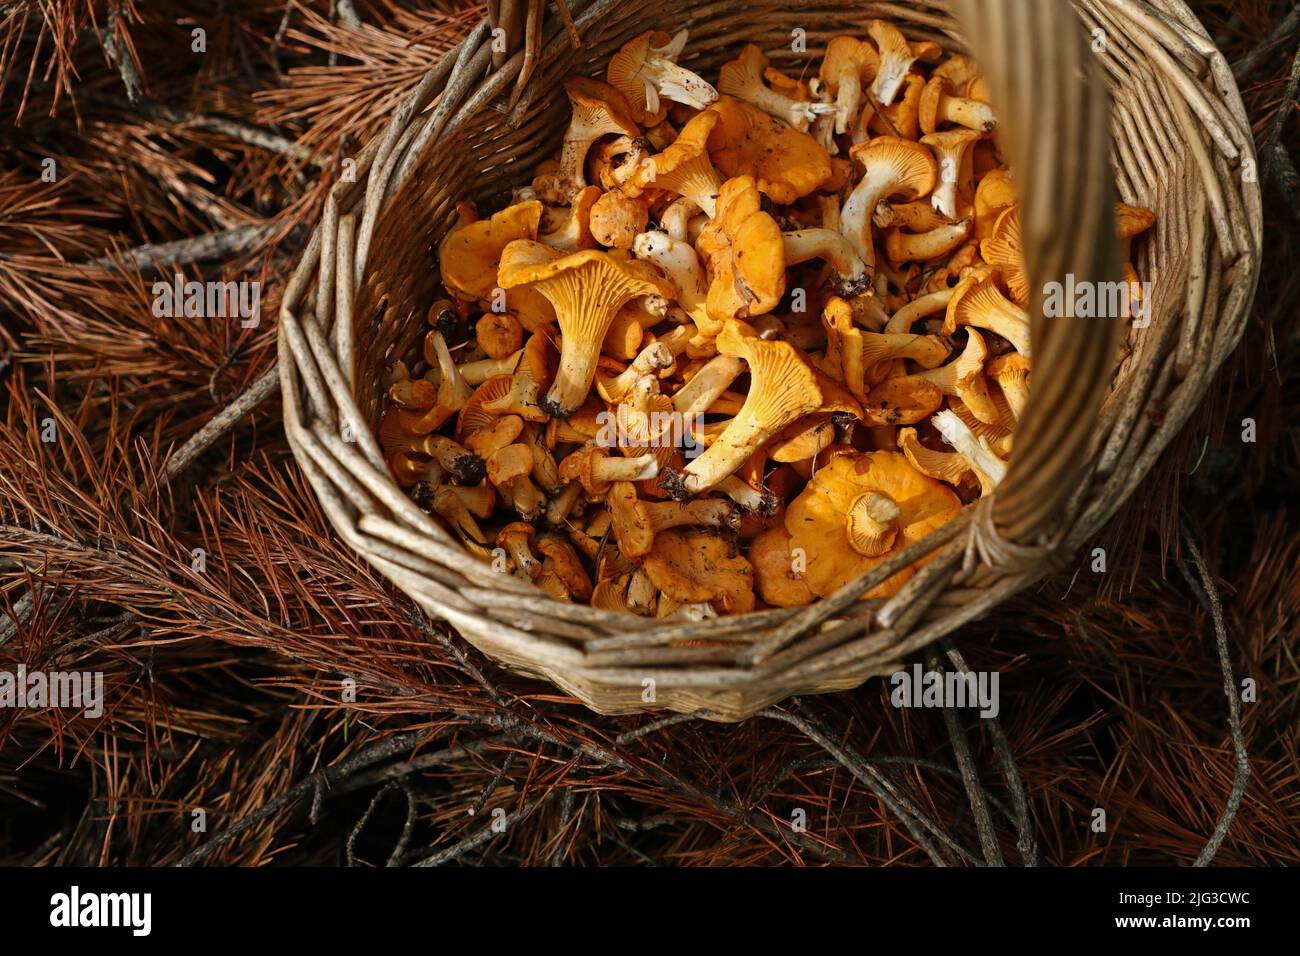 Mushroom picking is perfect in these corona times. In addition, many mushroom experts predict that it will be a good mushroom year this year. Here a filled mushroom basket with chanterelles (Cantharellus cibarius) from the forests outside Borensberg, Sweden. Stock Photo